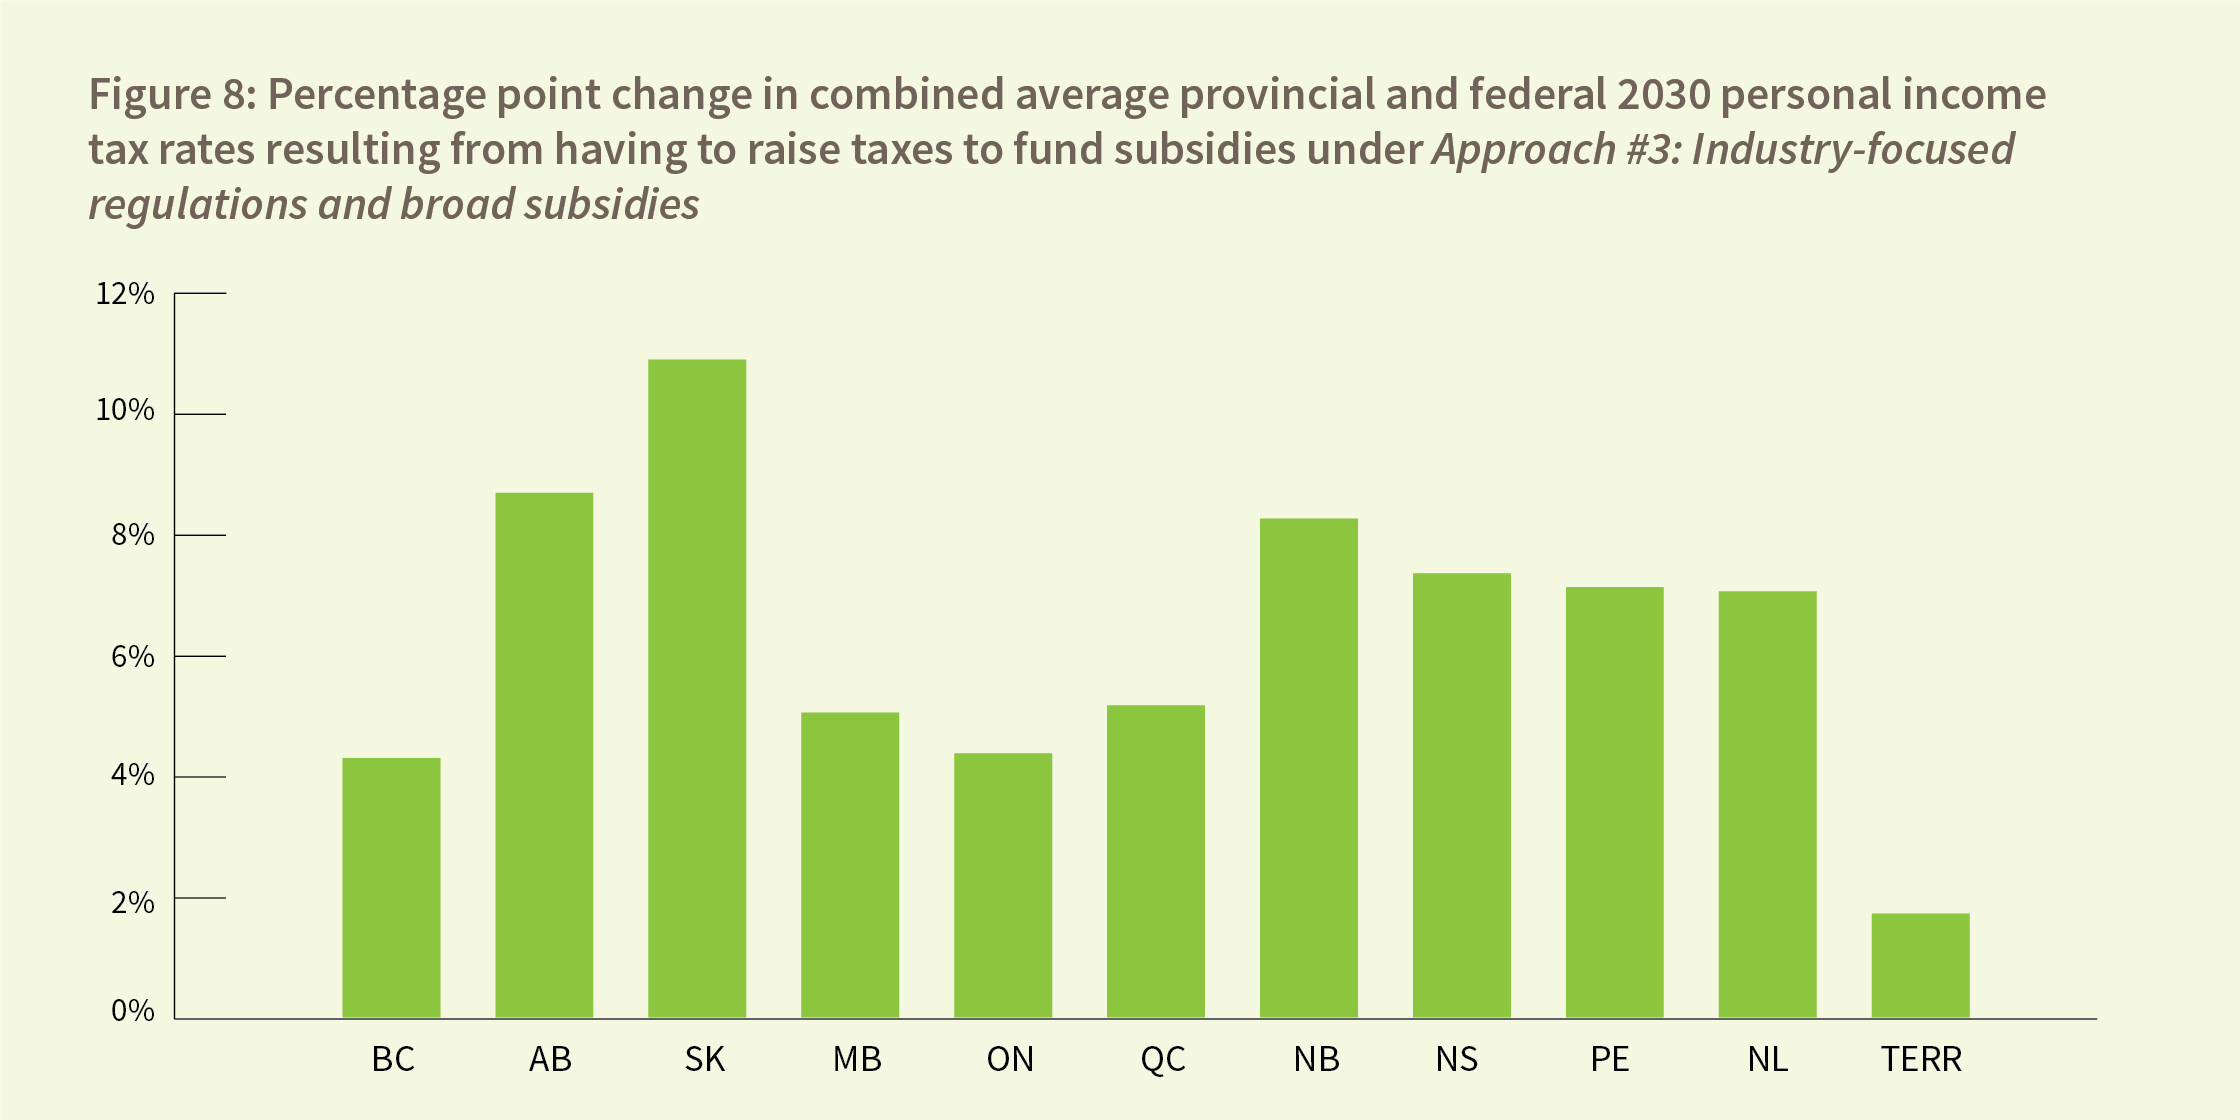 Figure 8: Percentage point change in combined average provincial and federal 2030 personal income tax rates resulting from having to raise taxes to fund subsidies under Approach #3: Industry-focused regulations and broad subsidies